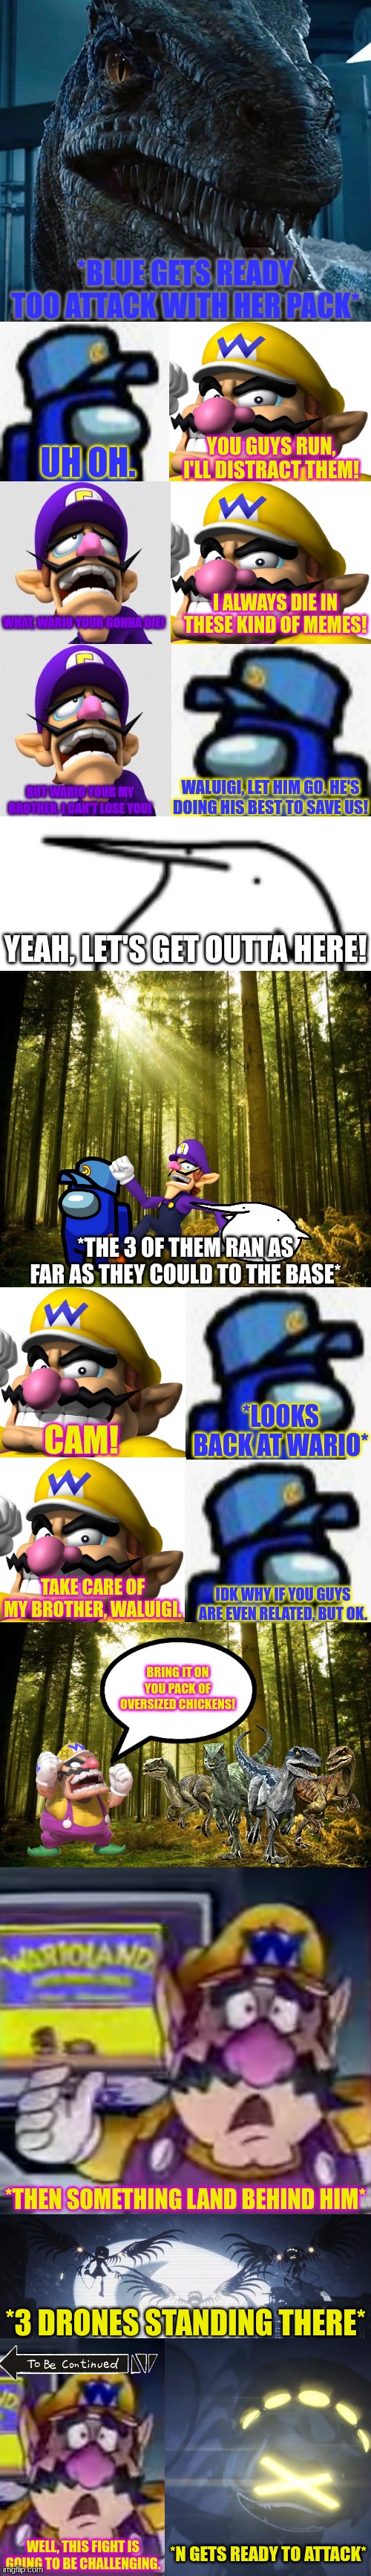 Cam tries to evade Uzi Part 12 | image tagged in murder drones,jurassic park,jurassic world,wario,ocs,crossover | made w/ Imgflip meme maker